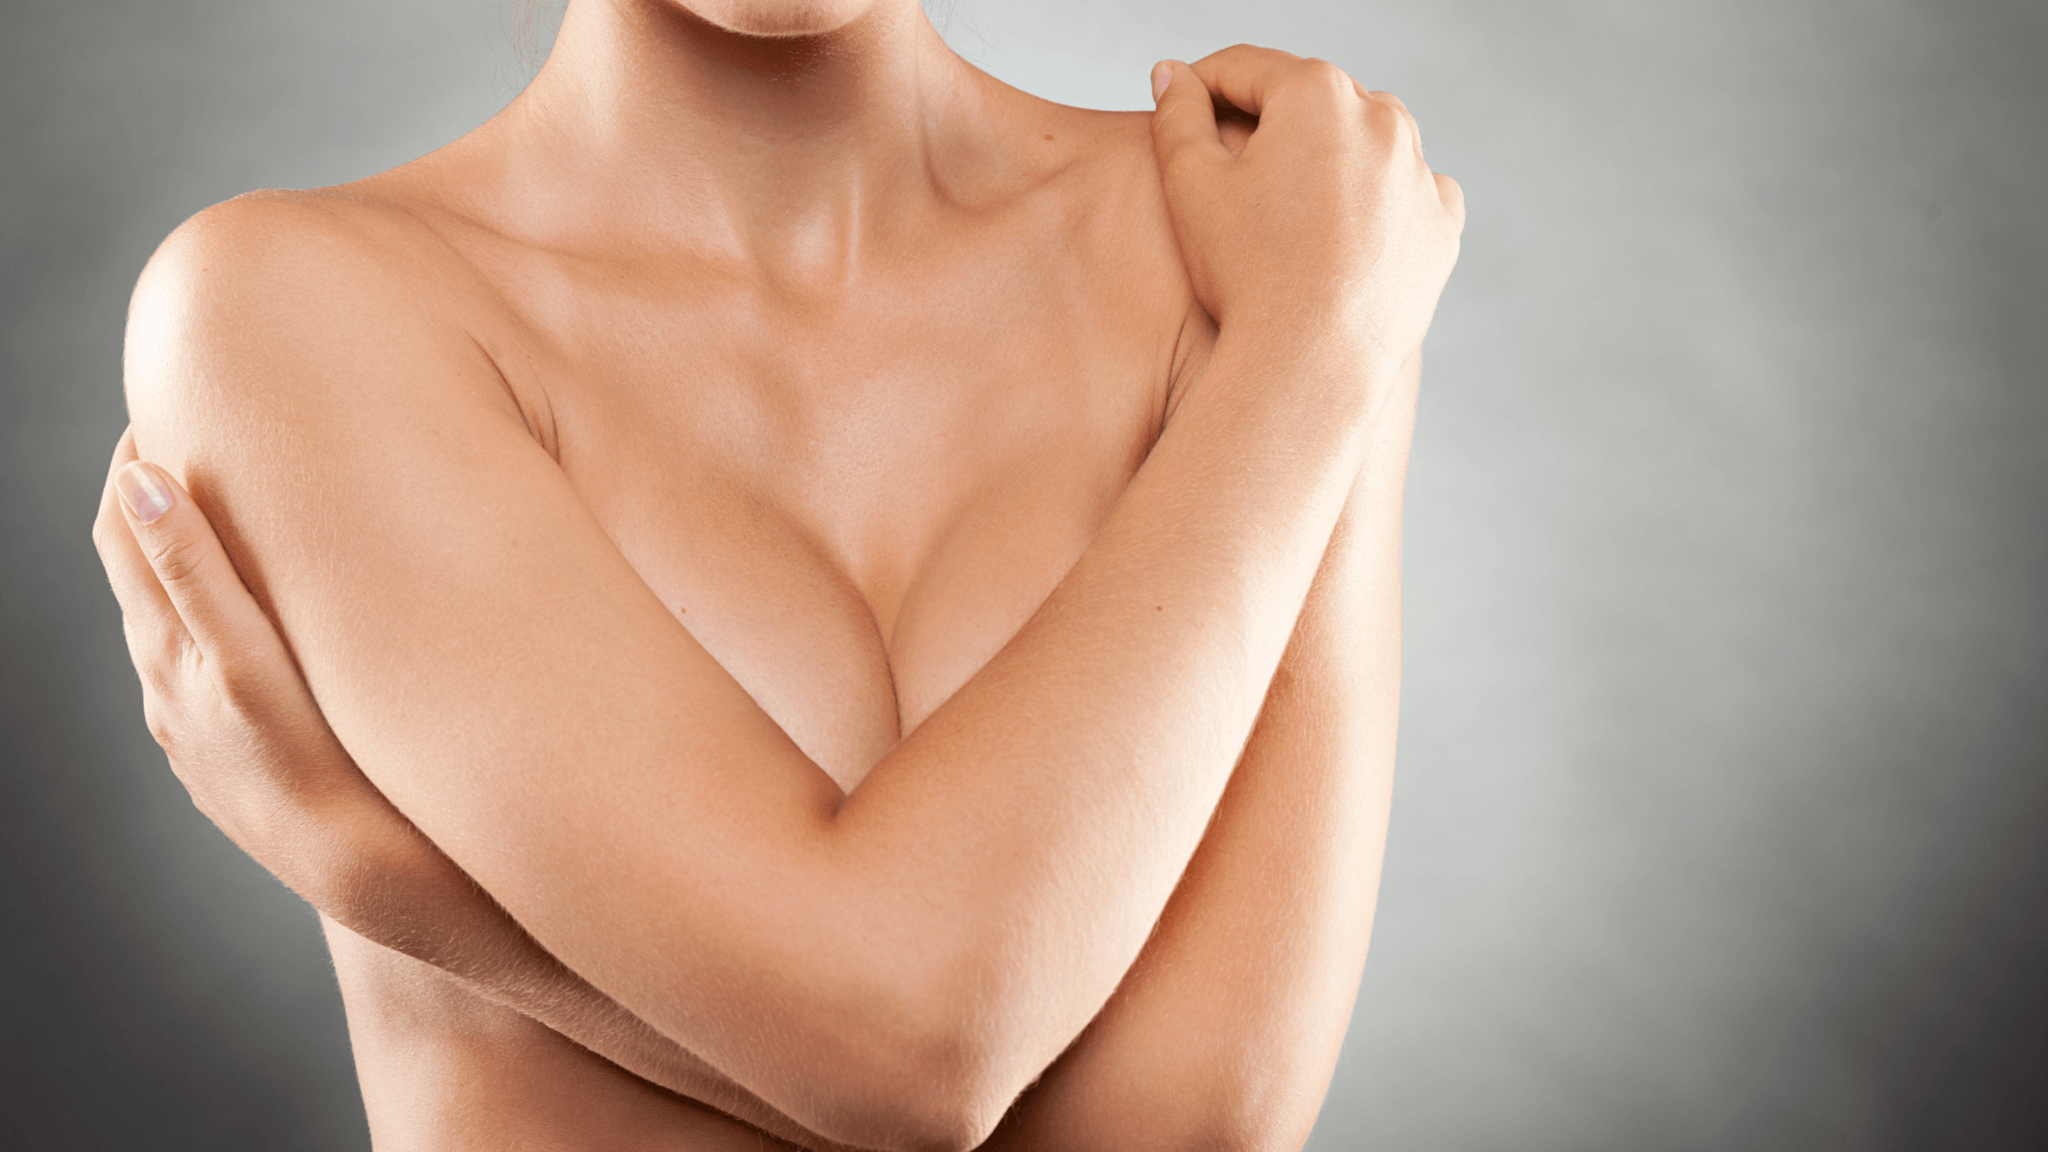 Will Breast Implants Feel Heavier Than Your Natural Breasts?